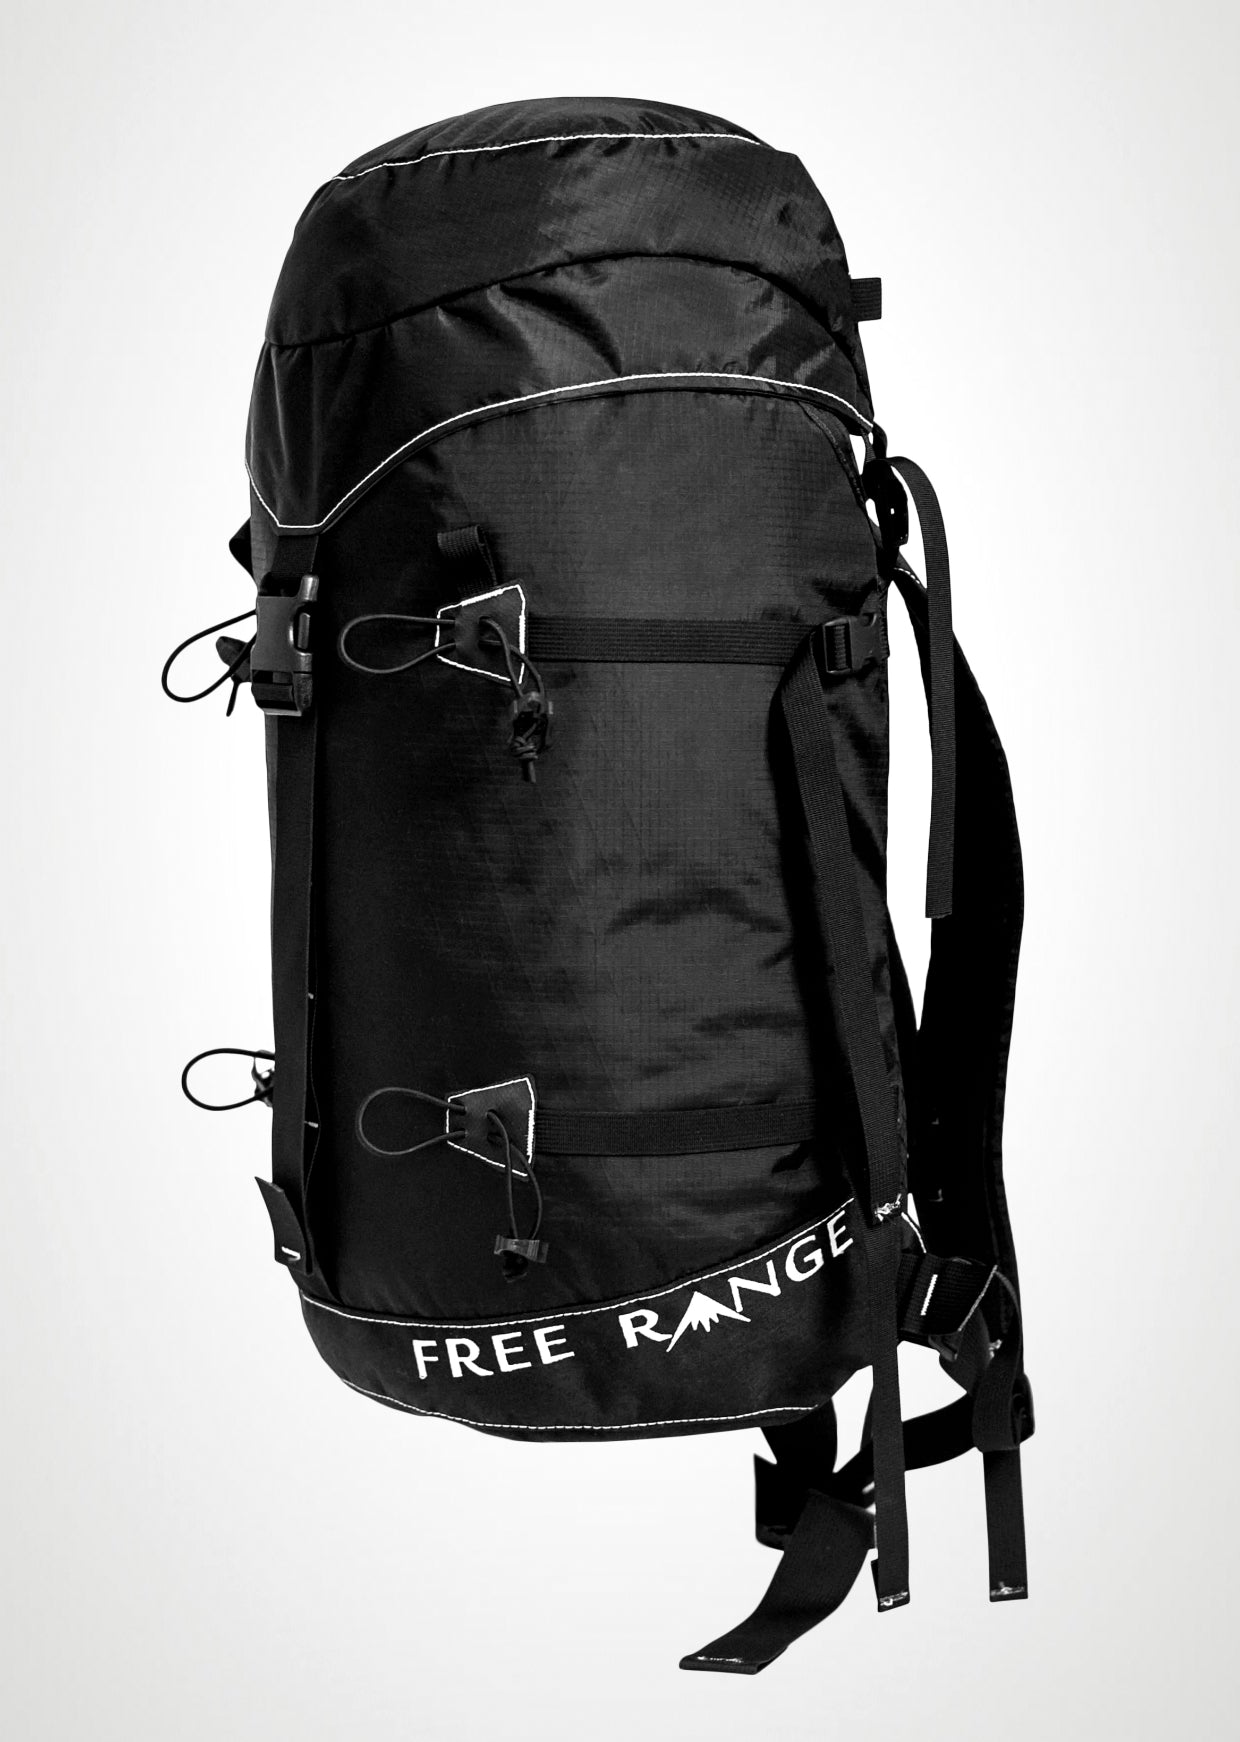 Free Range Equipment Big Medicine backpack. Light, durable, simple, functional backpack to get you high in the alpine. Made in Bend, OR.